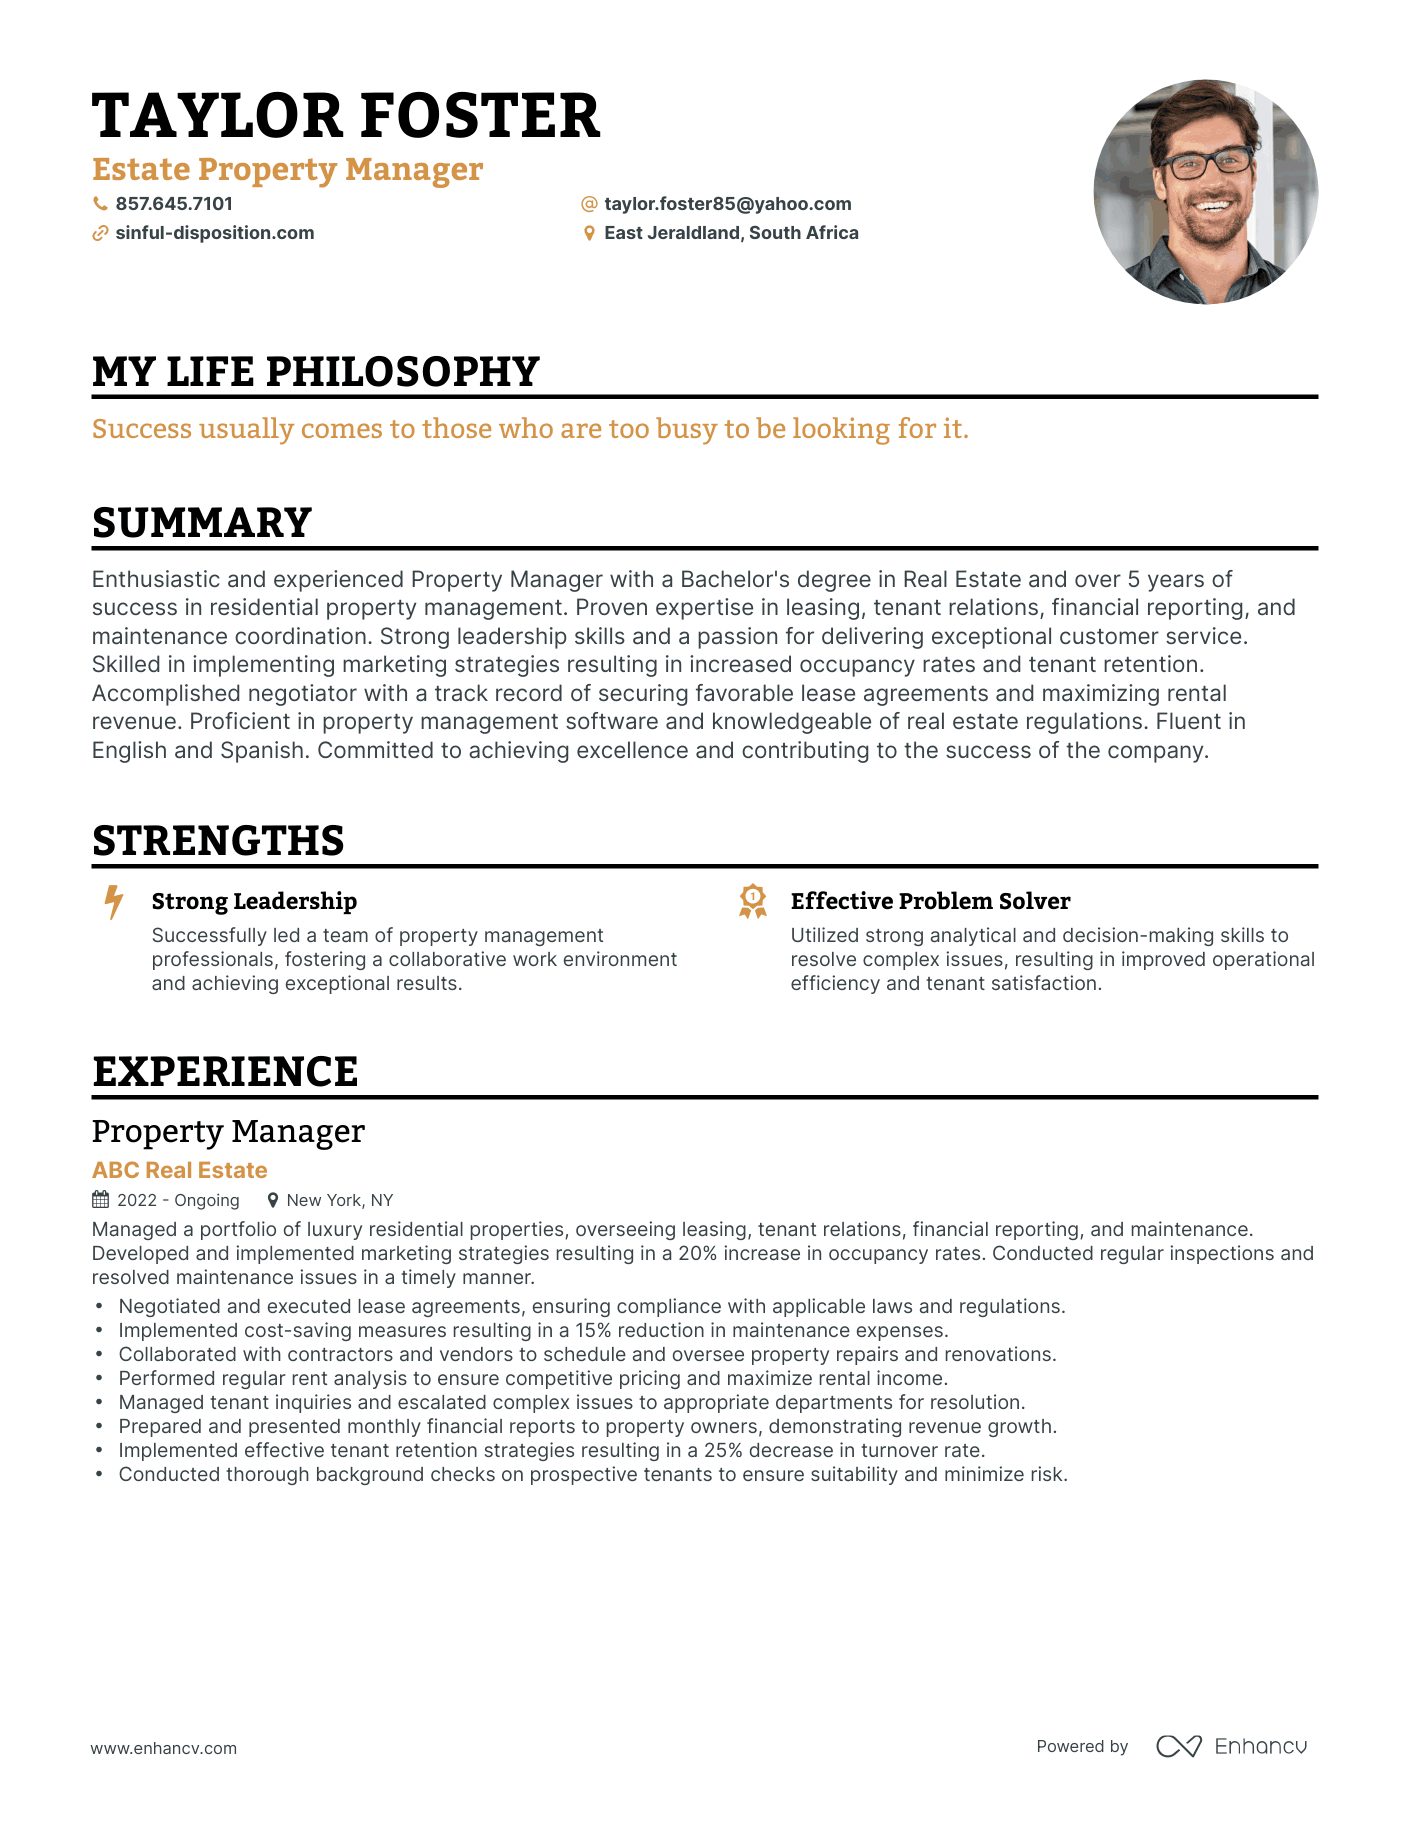 Creative Estate Property Manager Resume Example